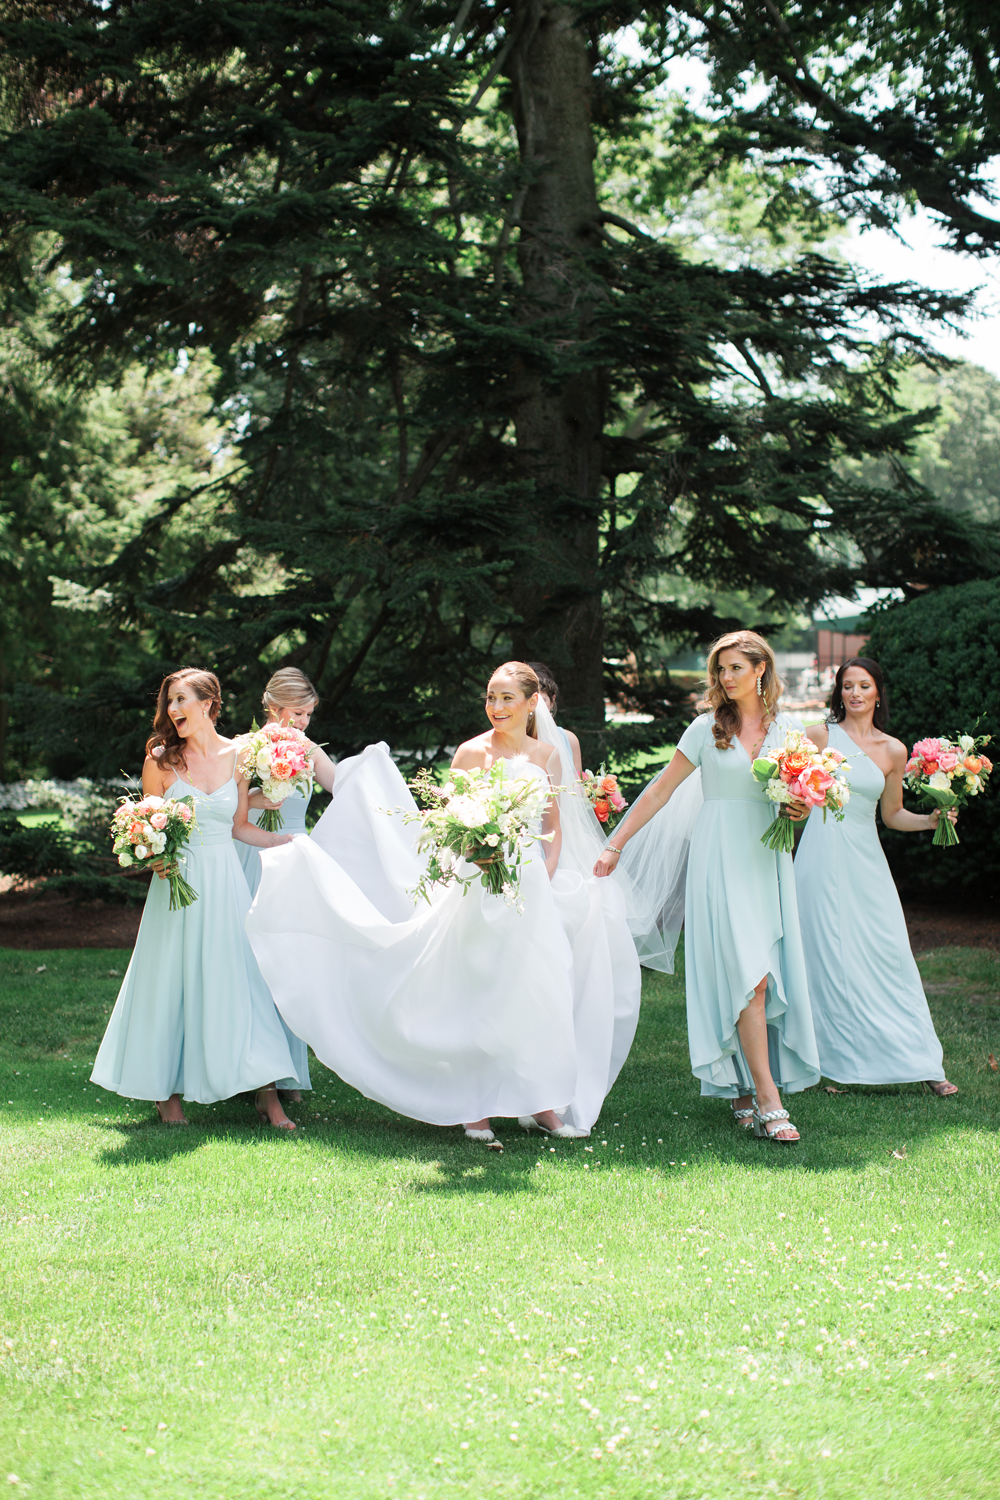 Bridesmaids help bride walk at Genesee Valley club on wedding day with blue dresses and modern design | Mary Dougherty Photography